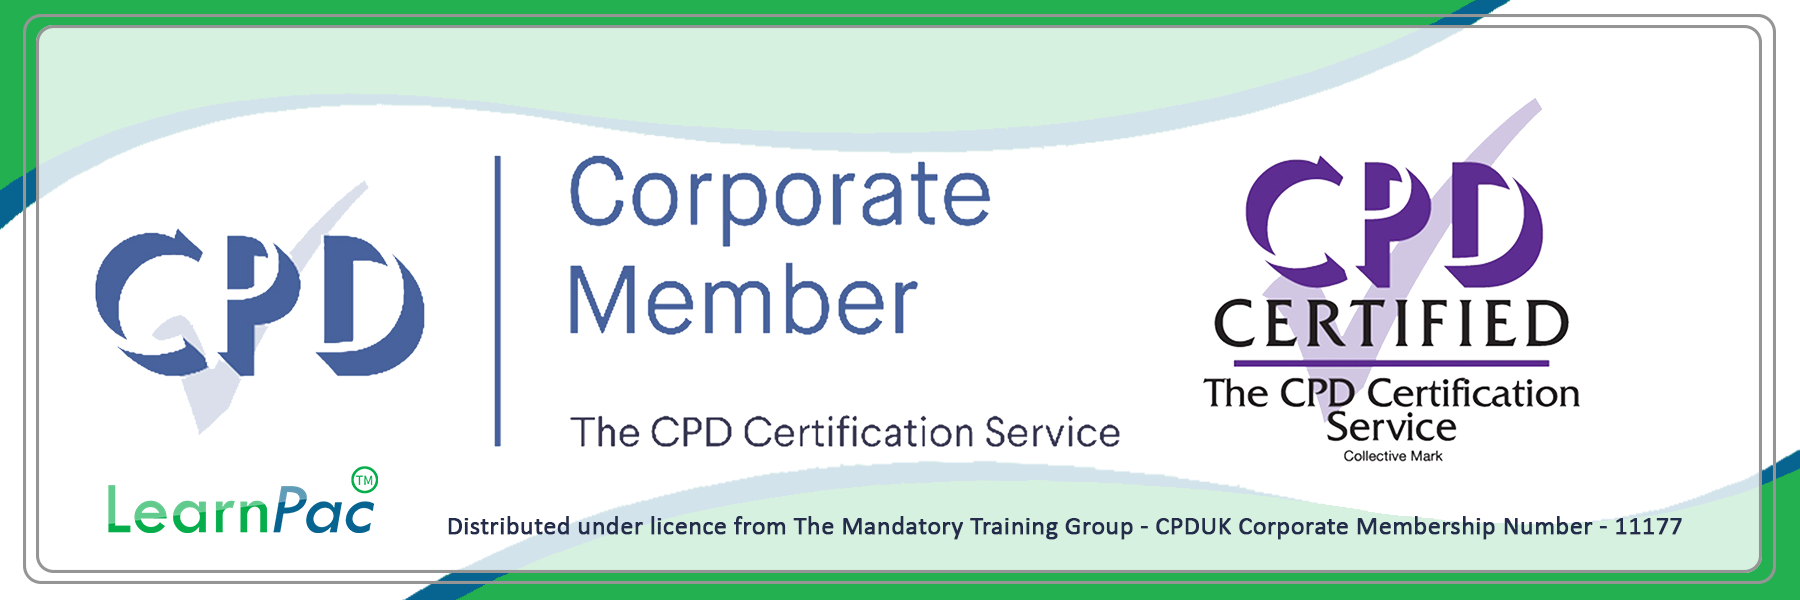 Information Governance - E-Learning Courses with Certificates - CPD Certified - LearnPac Systems UK -